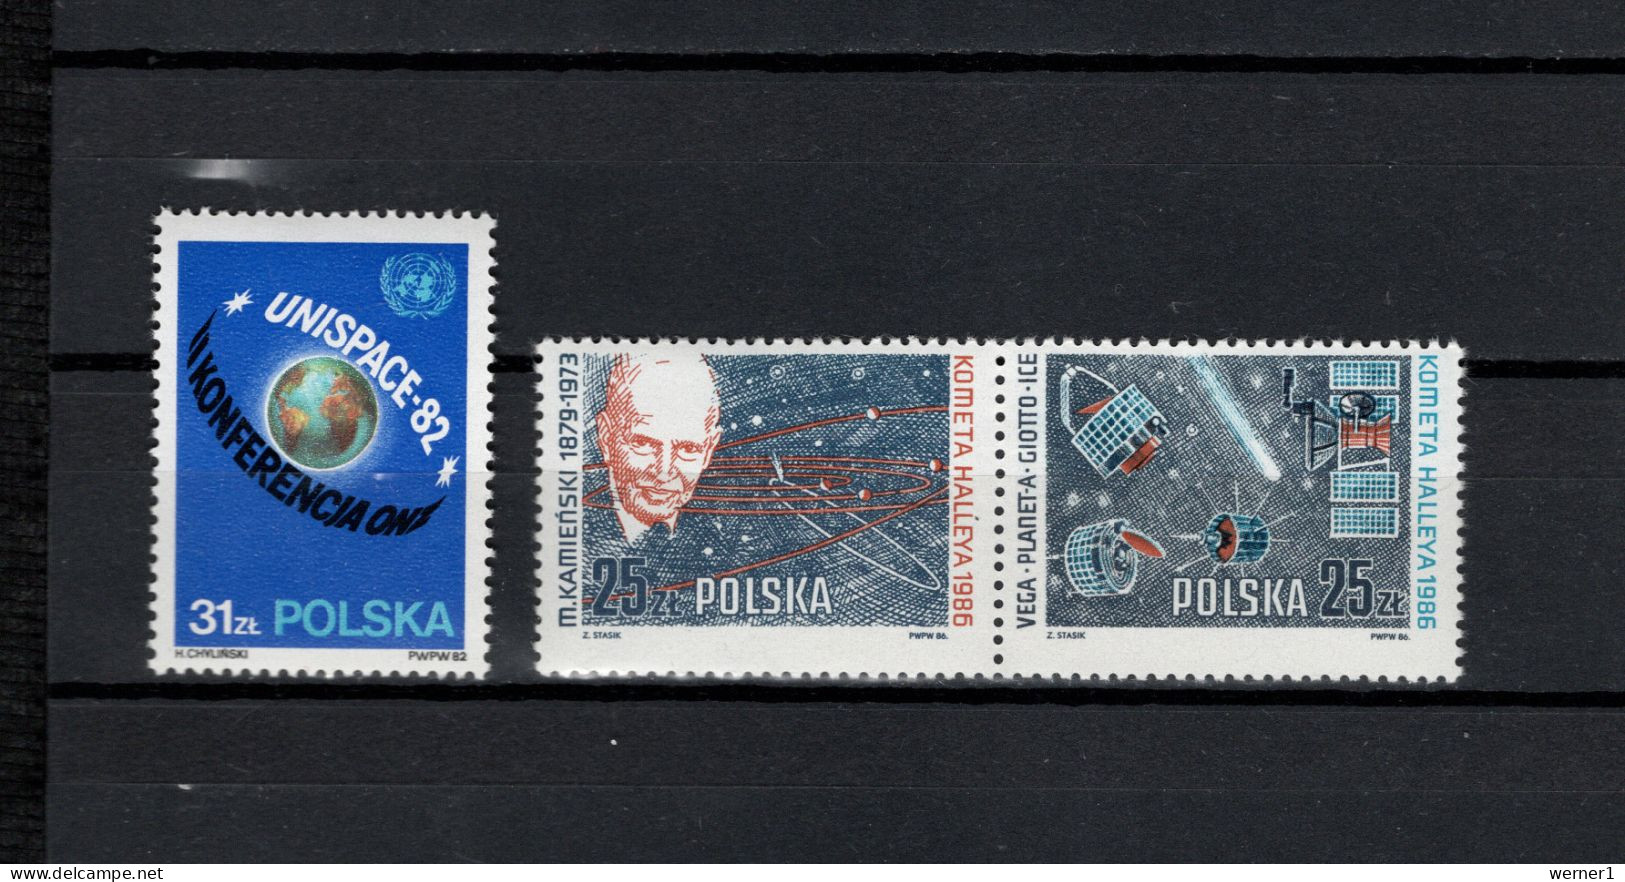 Poland 1982/1986 Space, UNISPACE, Halley's Comet 3 Stamps MNH - Europe